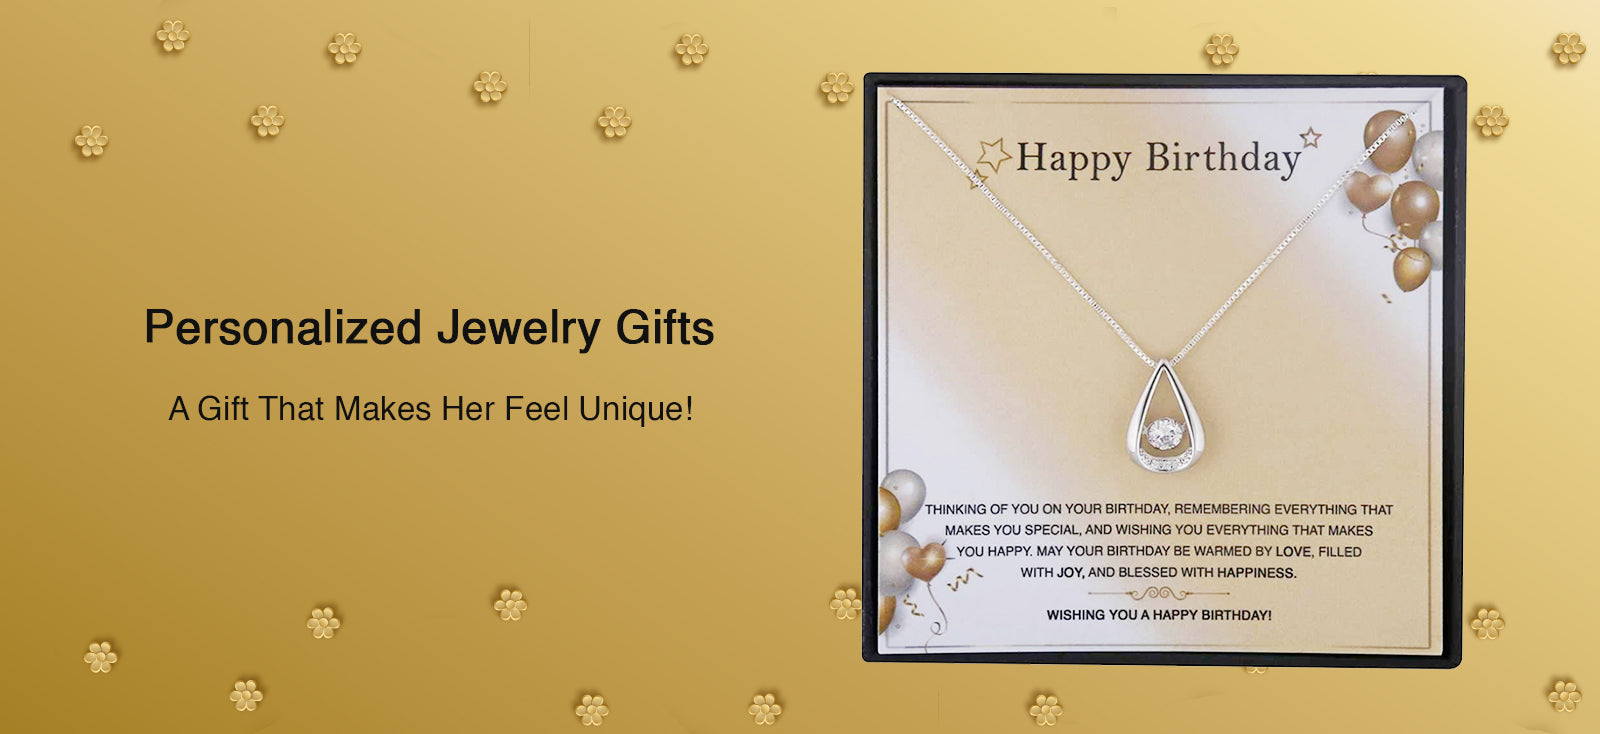 Personalized Jewelry For Occasions